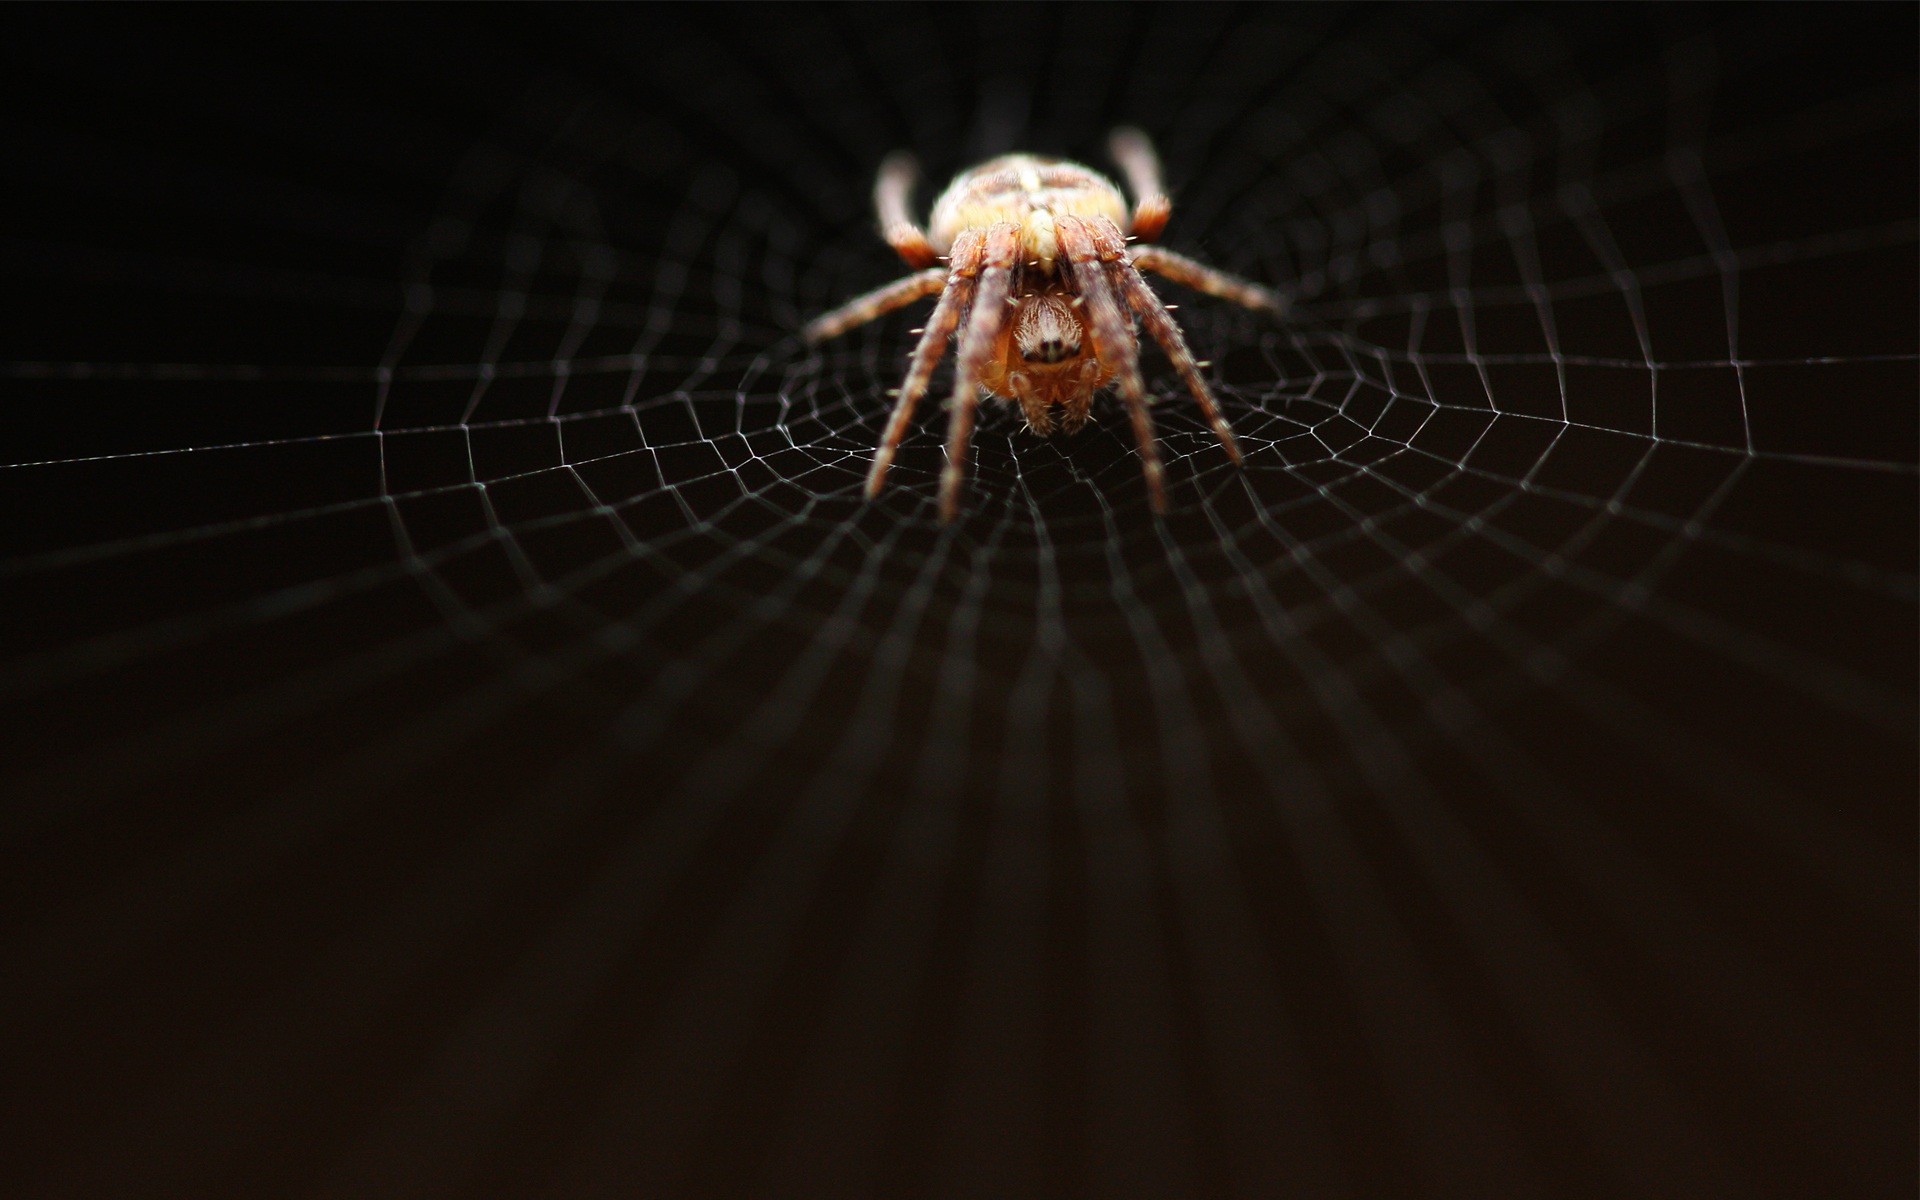 nature, insects, hunter, spiders - desktop wallpaper